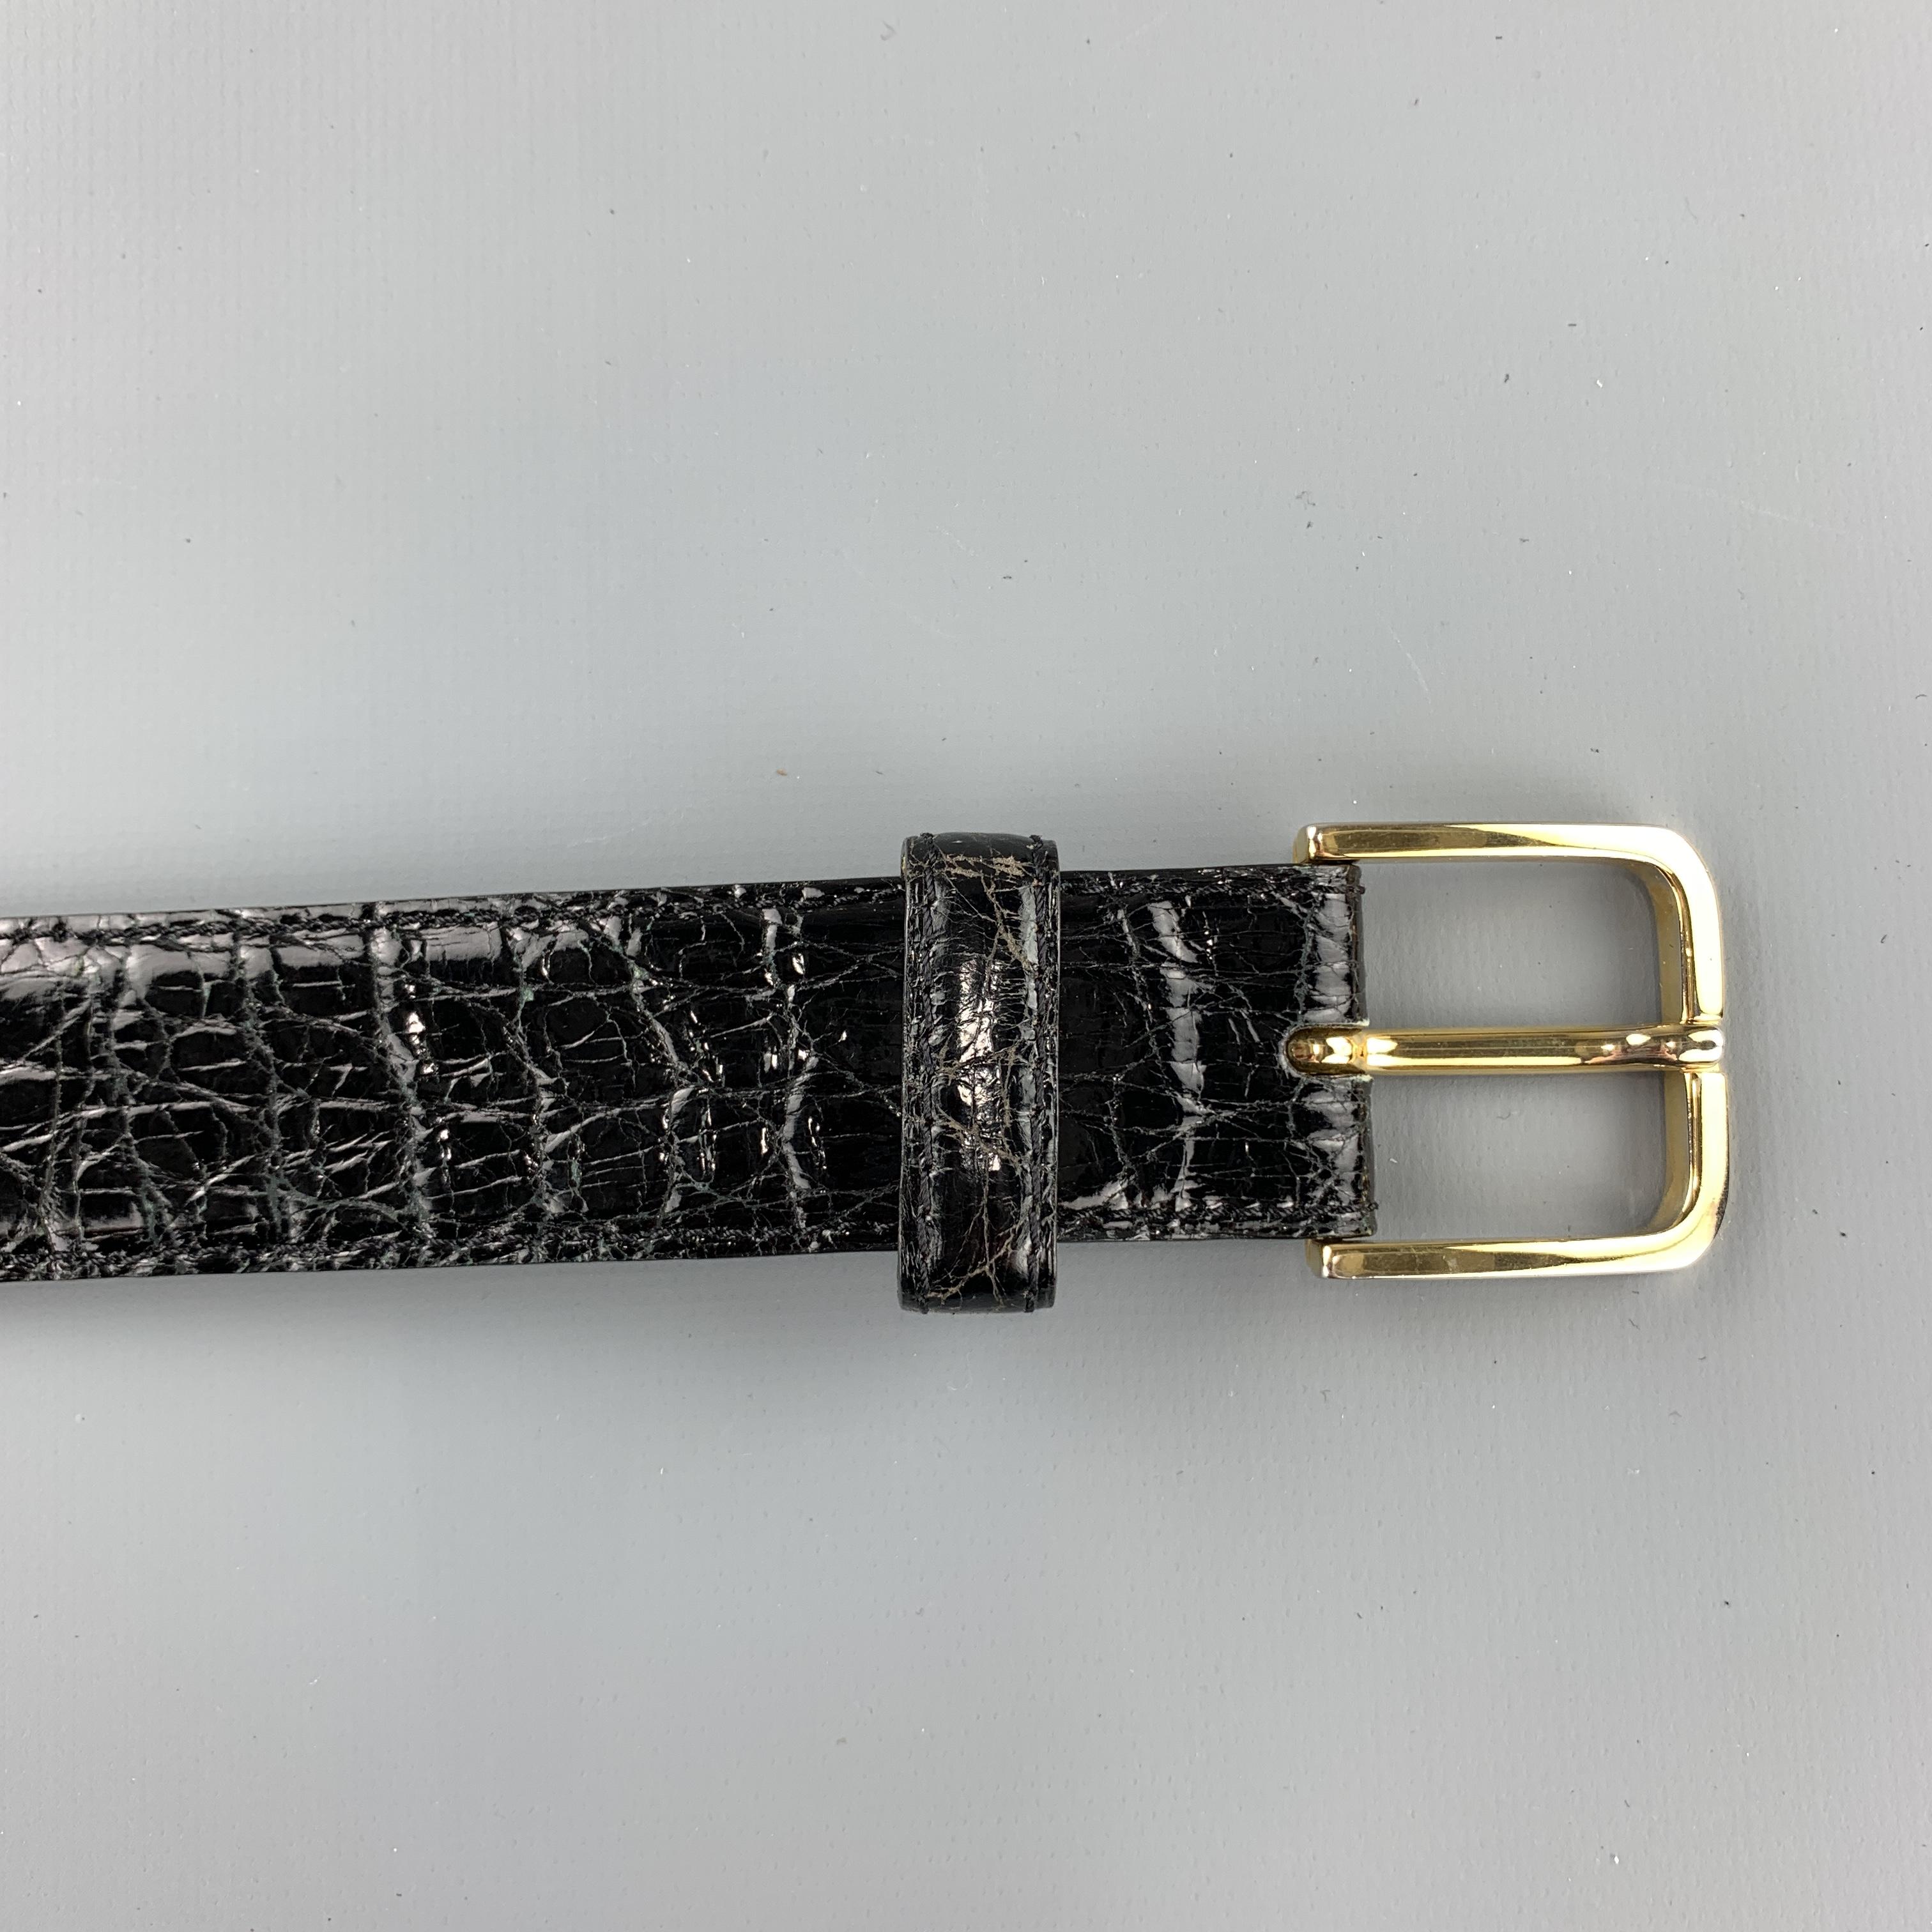 SULKA dress belt features a genuine crocodile leather strap with a gold tone snap off buckle. Made in Italy.

Very Good Pre-Owned Condition.
Marked: 95 / 36

Length: 44 in.
Width: 3 cm.
Minimum Fit: 36 in.
Maximum Fit: 40 in.